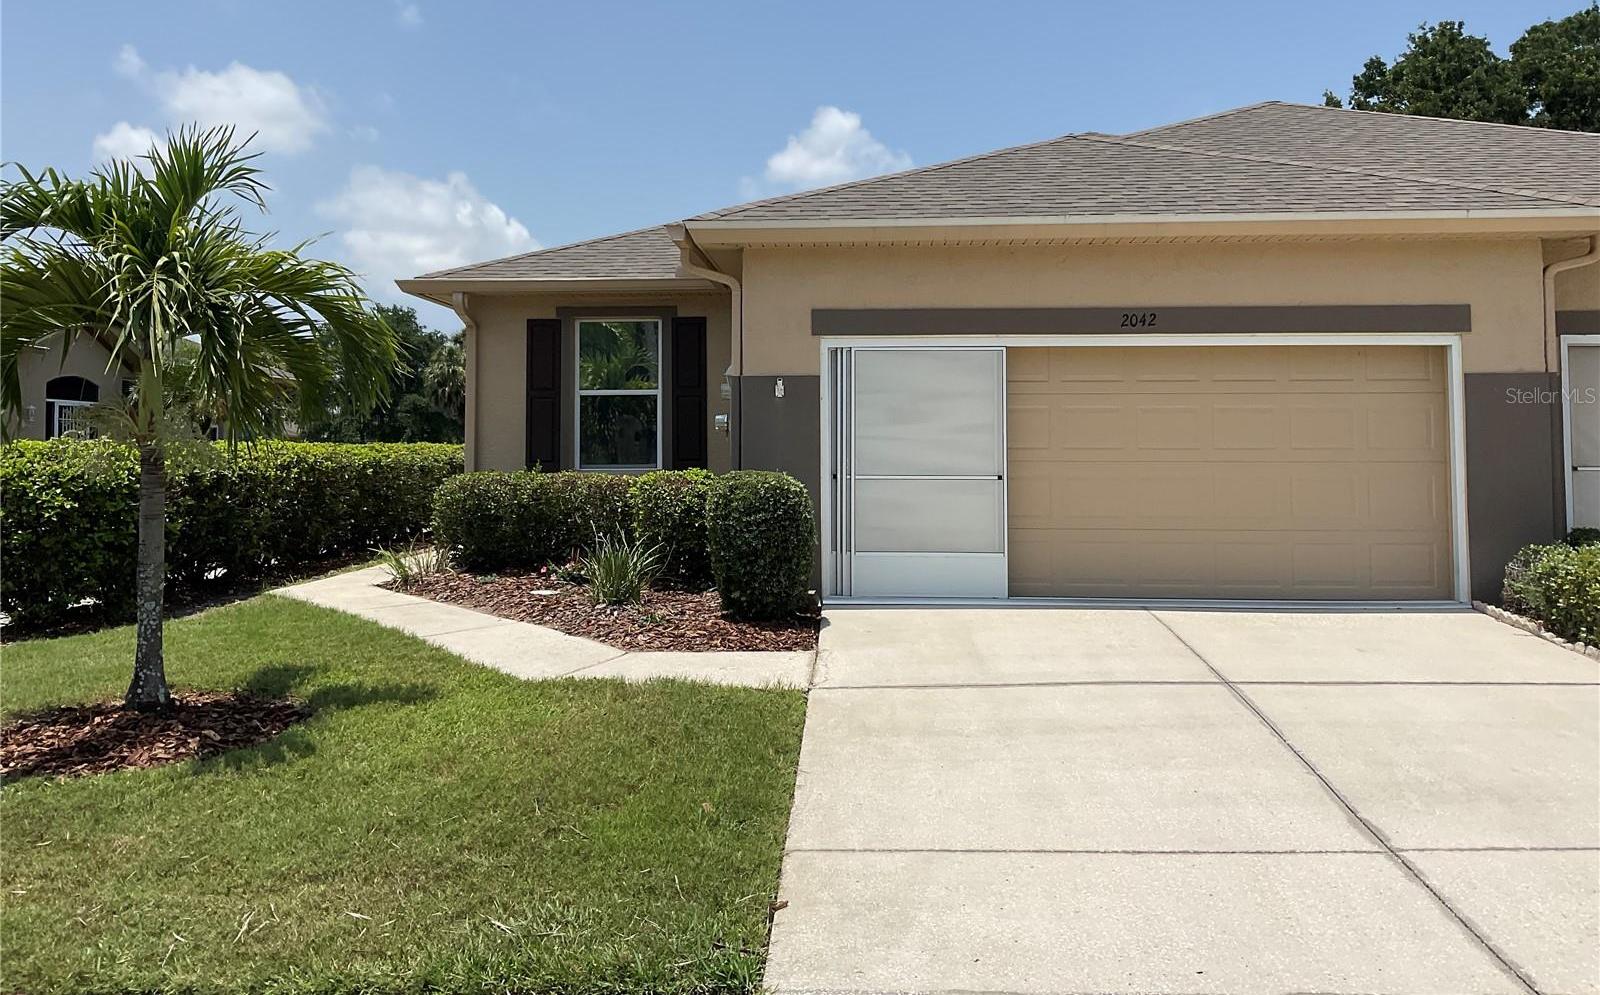 Photo one of 2042 Acadia Greens Dr Sun City Center FL 33573 | MLS T3521553